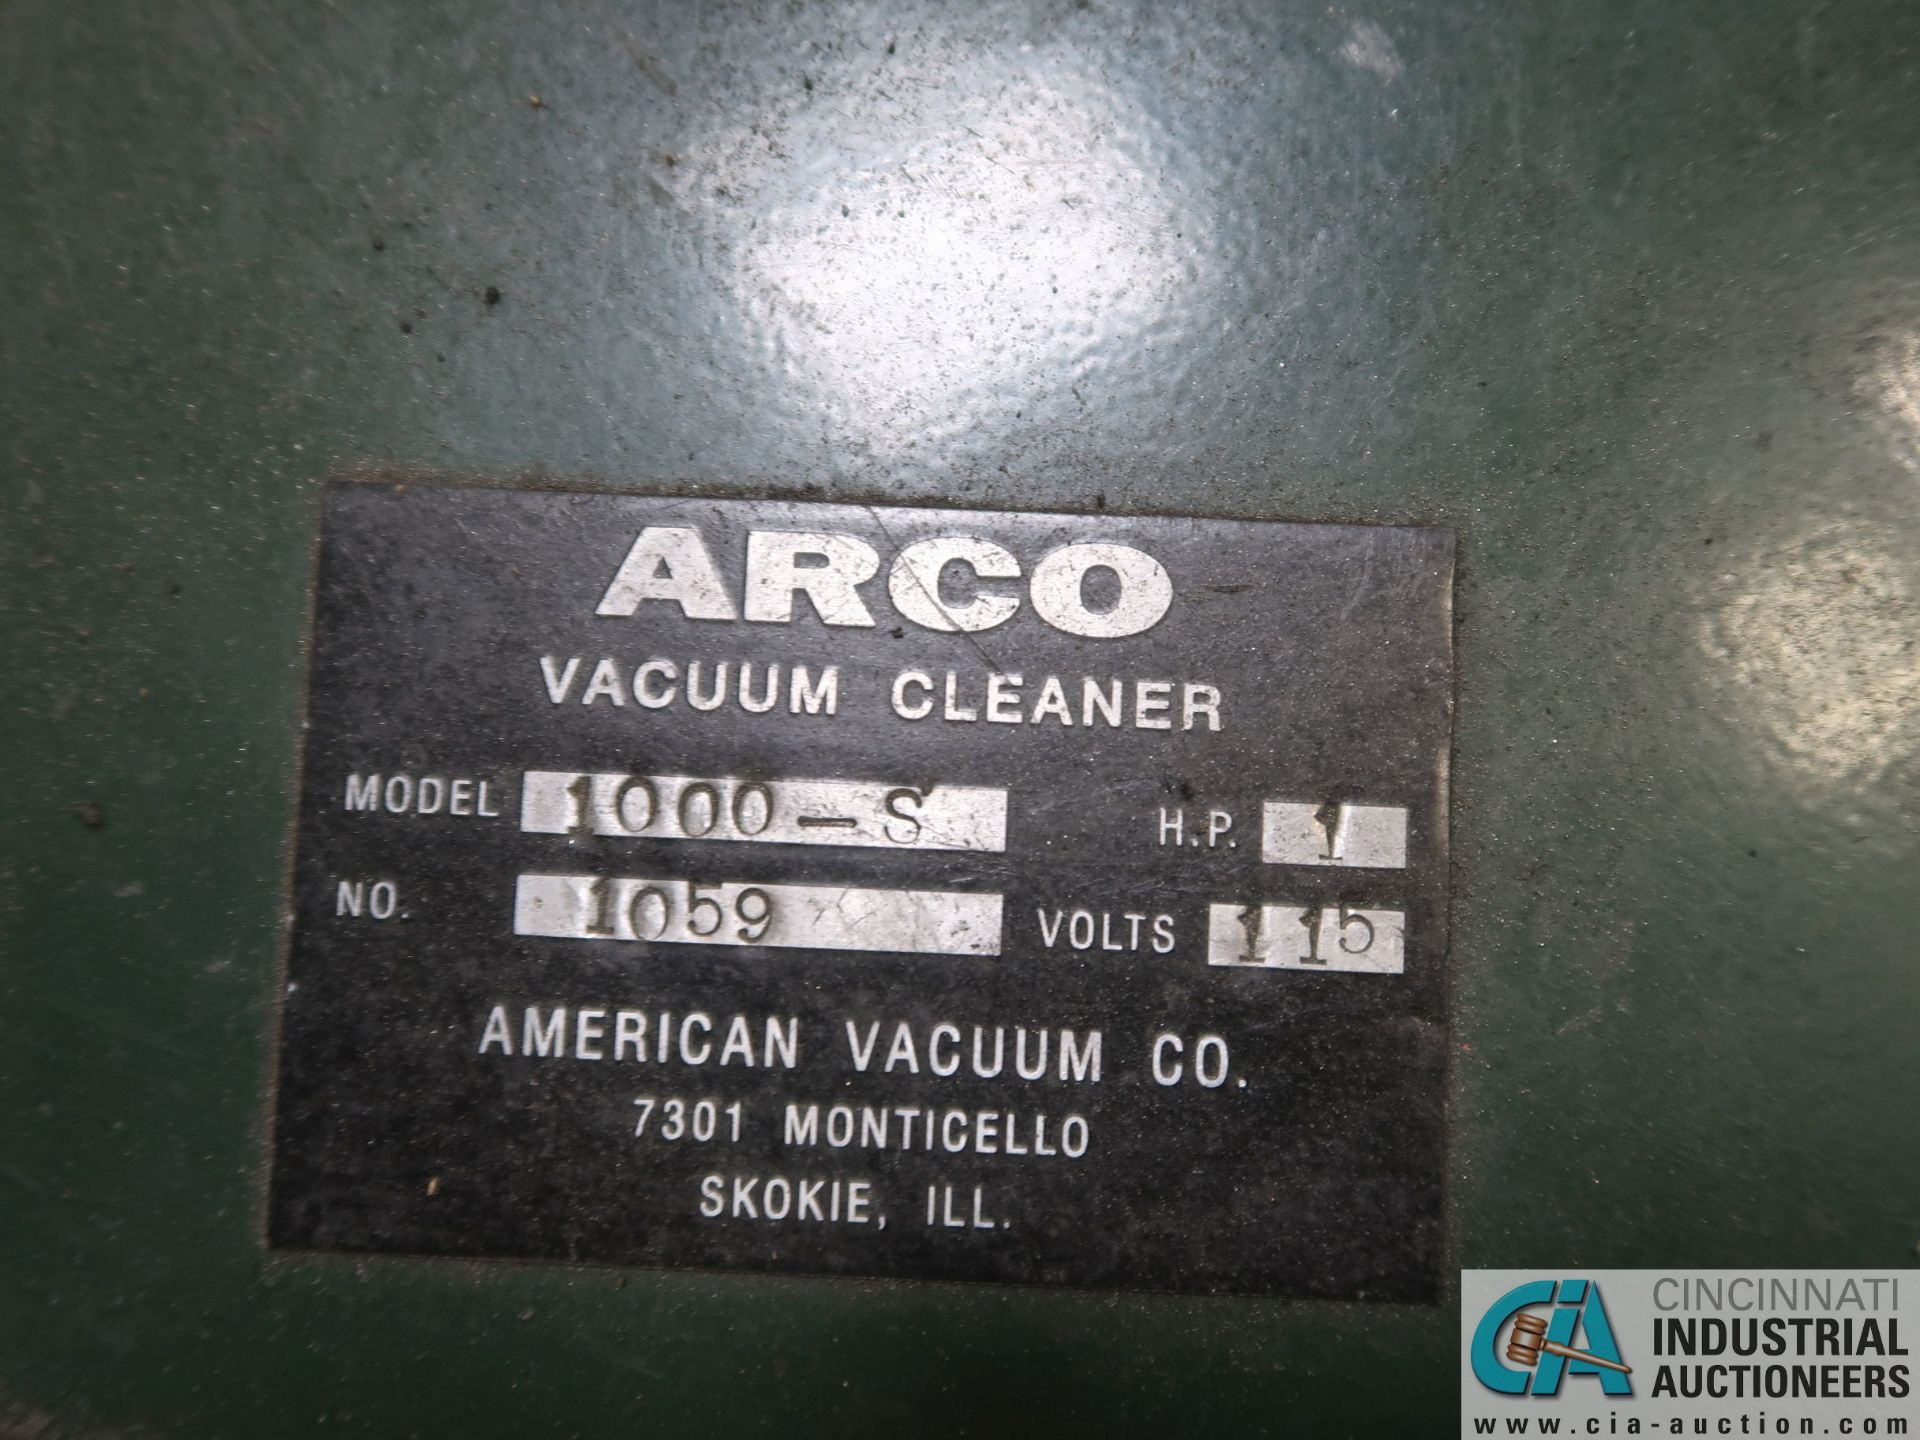 ACROWAND MODEL 1000S PORTABLE VACUUM CLEANER - Image 2 of 2